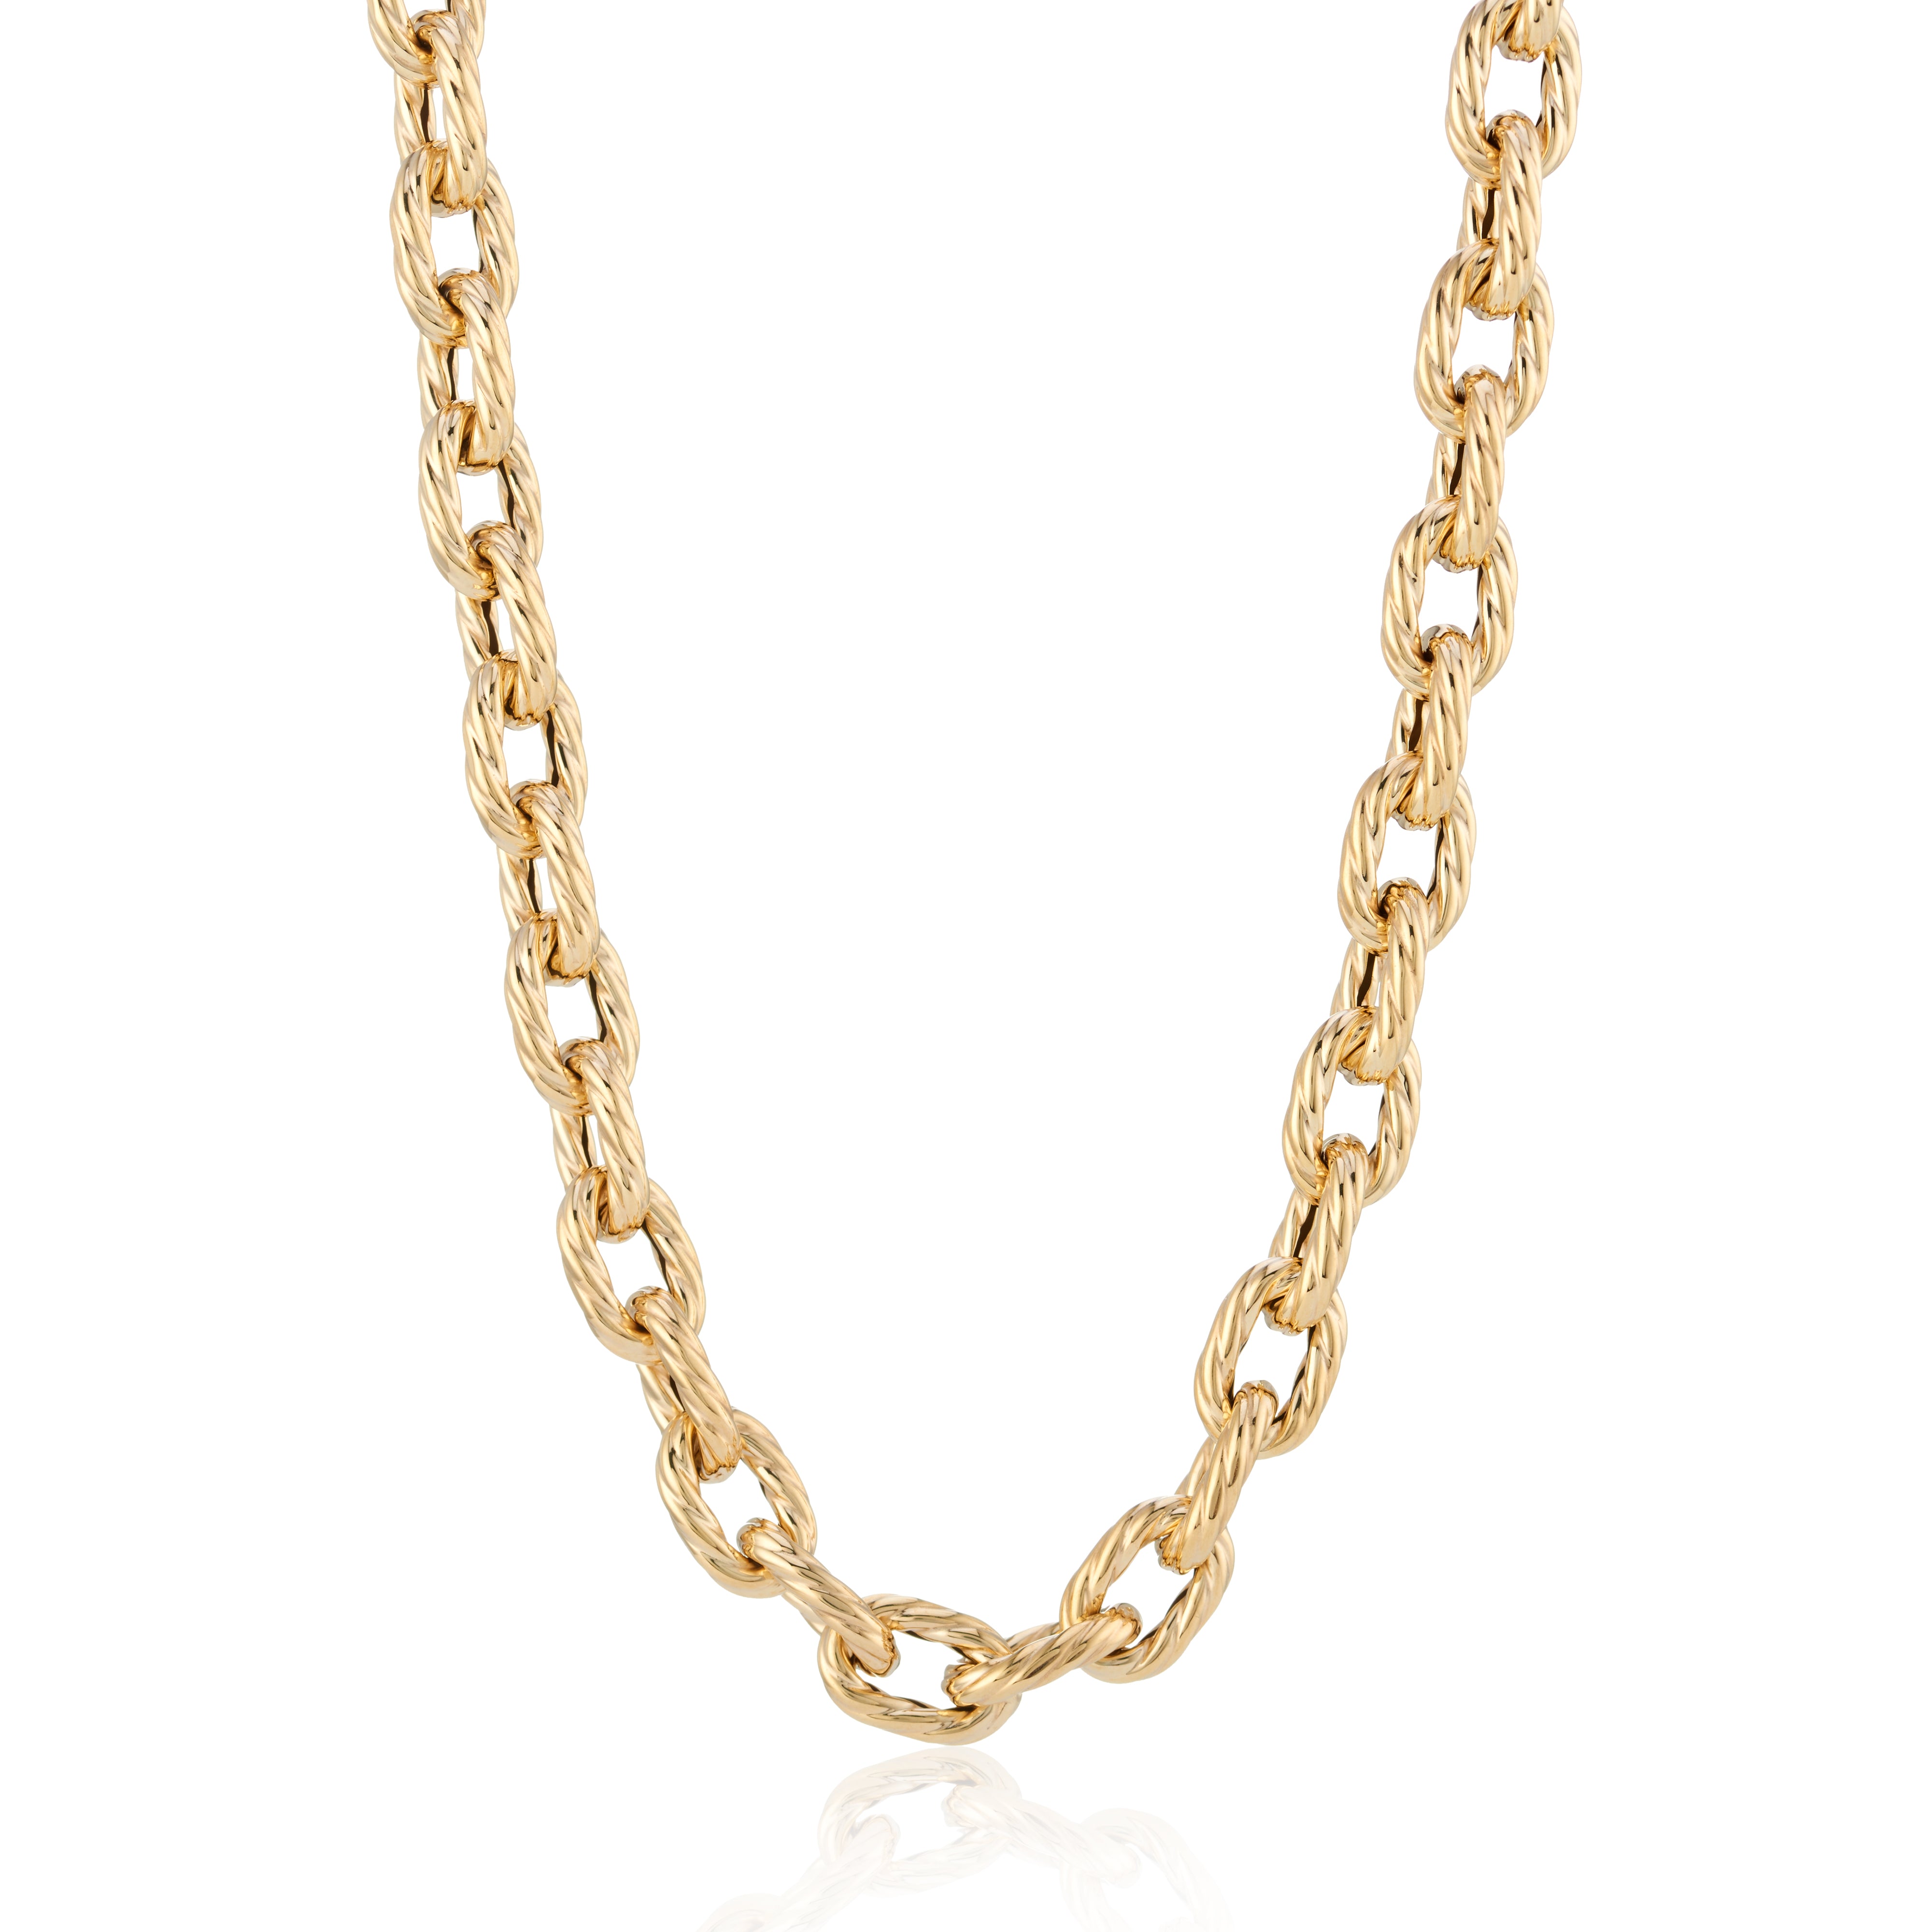 YELLOW GOLD ROPE STYLE NECKLACE